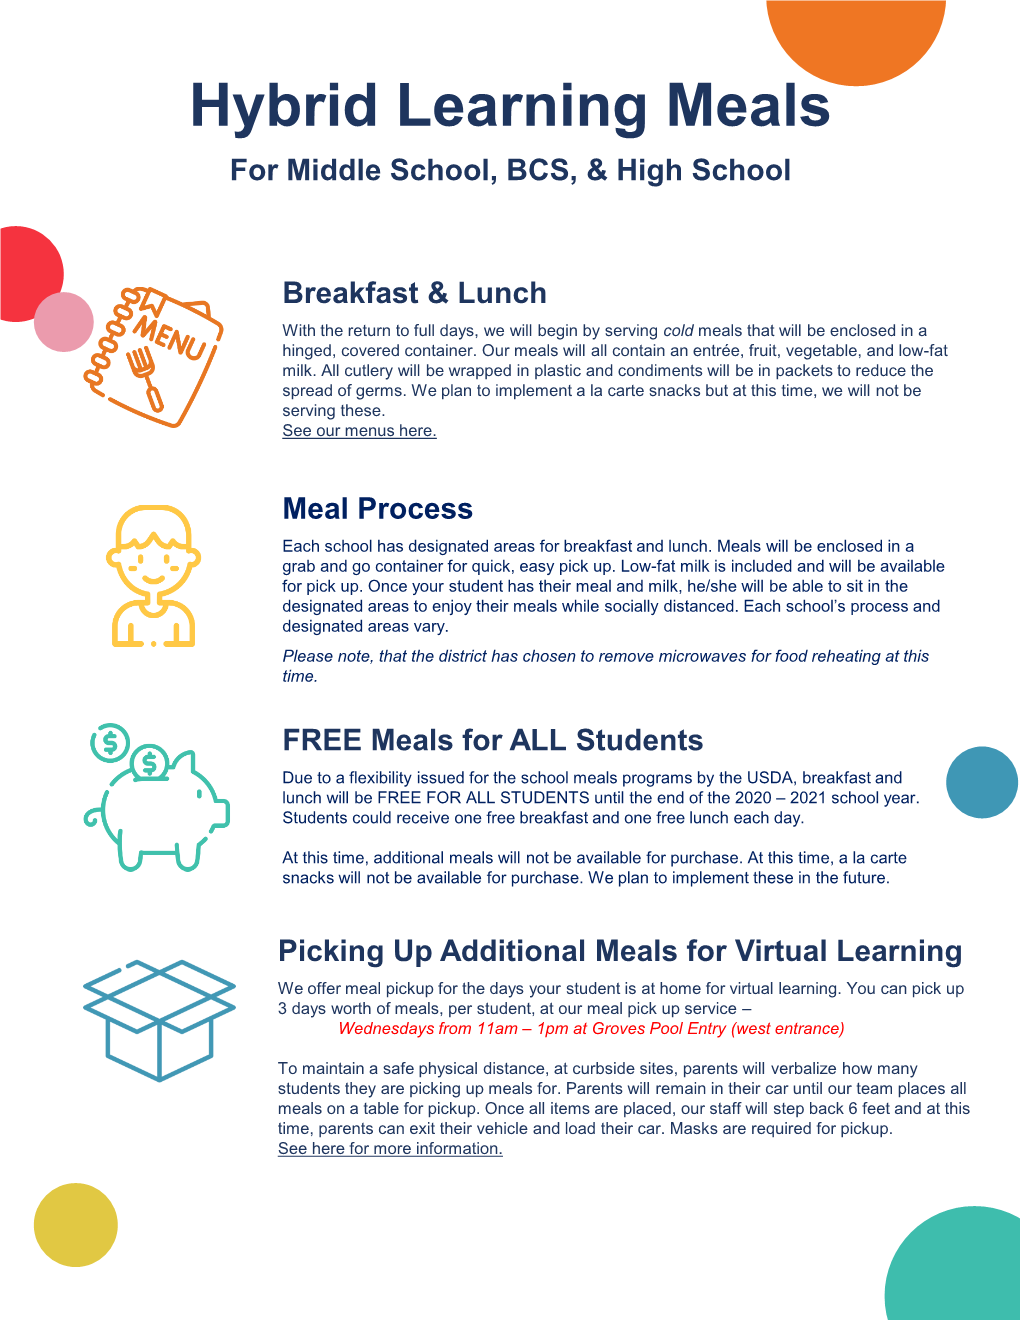 Hybrid Learning Meals for Middle School, BCS, & High School